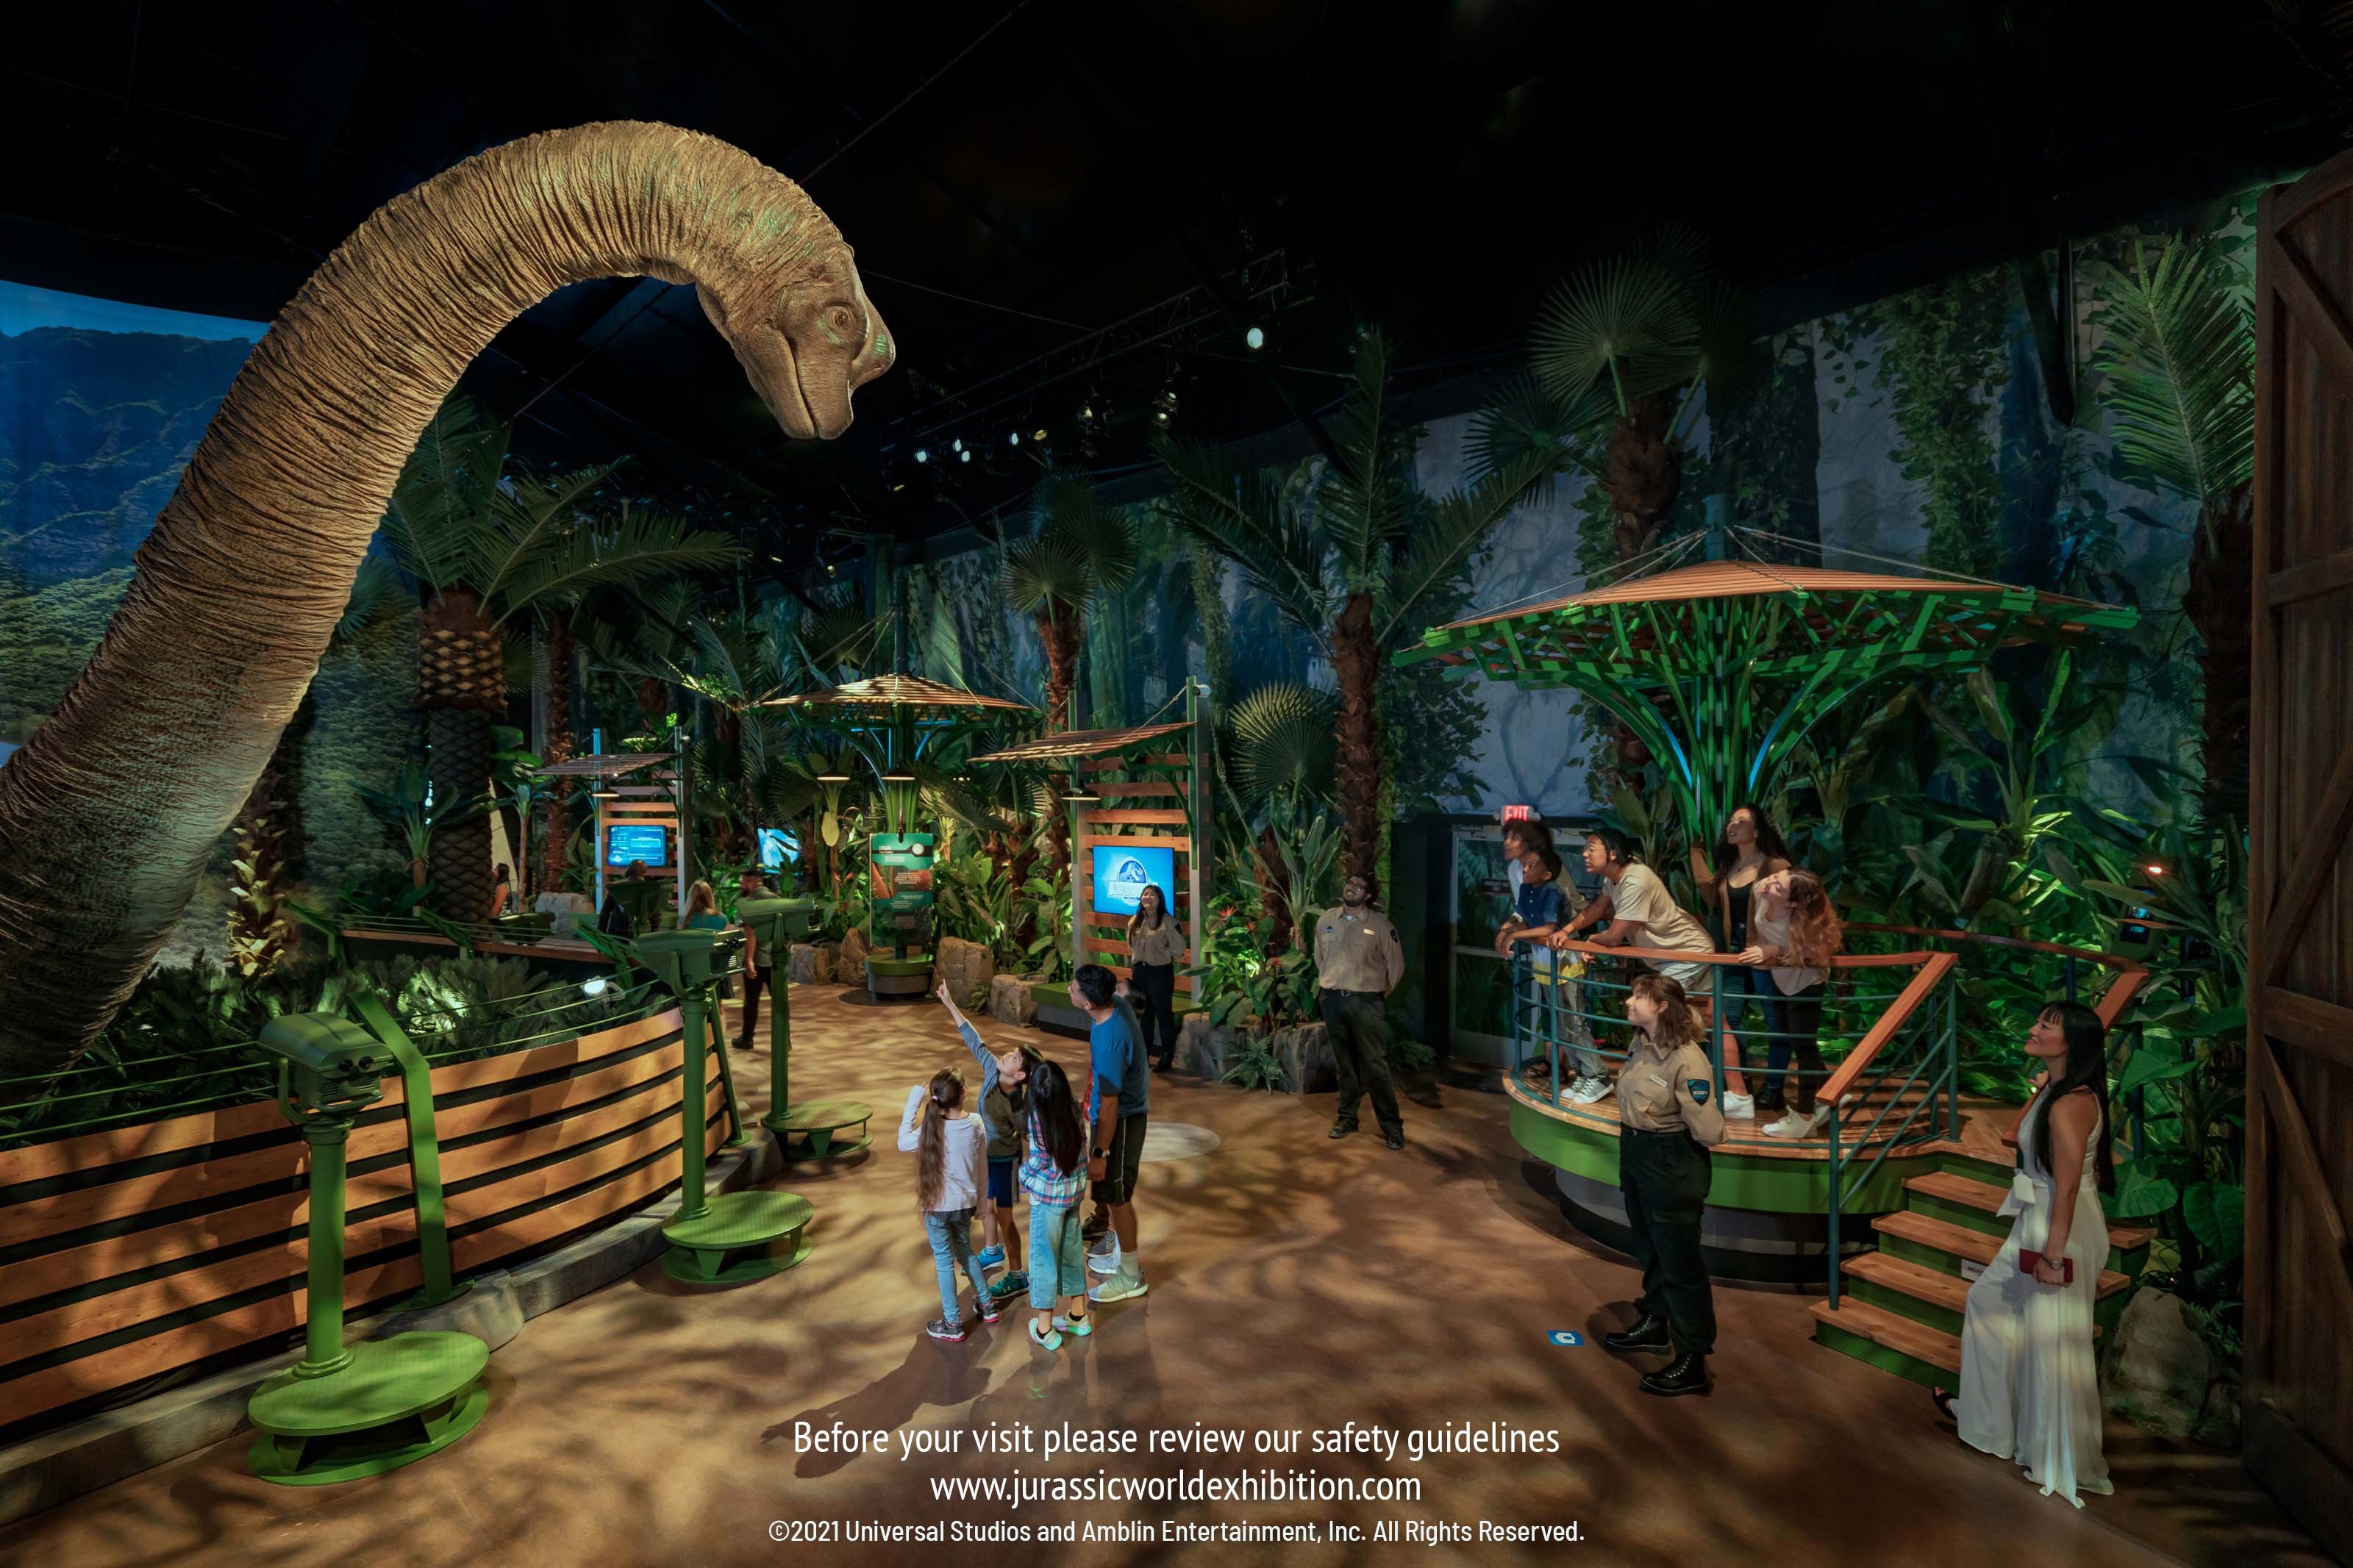 JURASSIC WORLD THE EXHIBITION Roars Into Denver March 2022 for Western